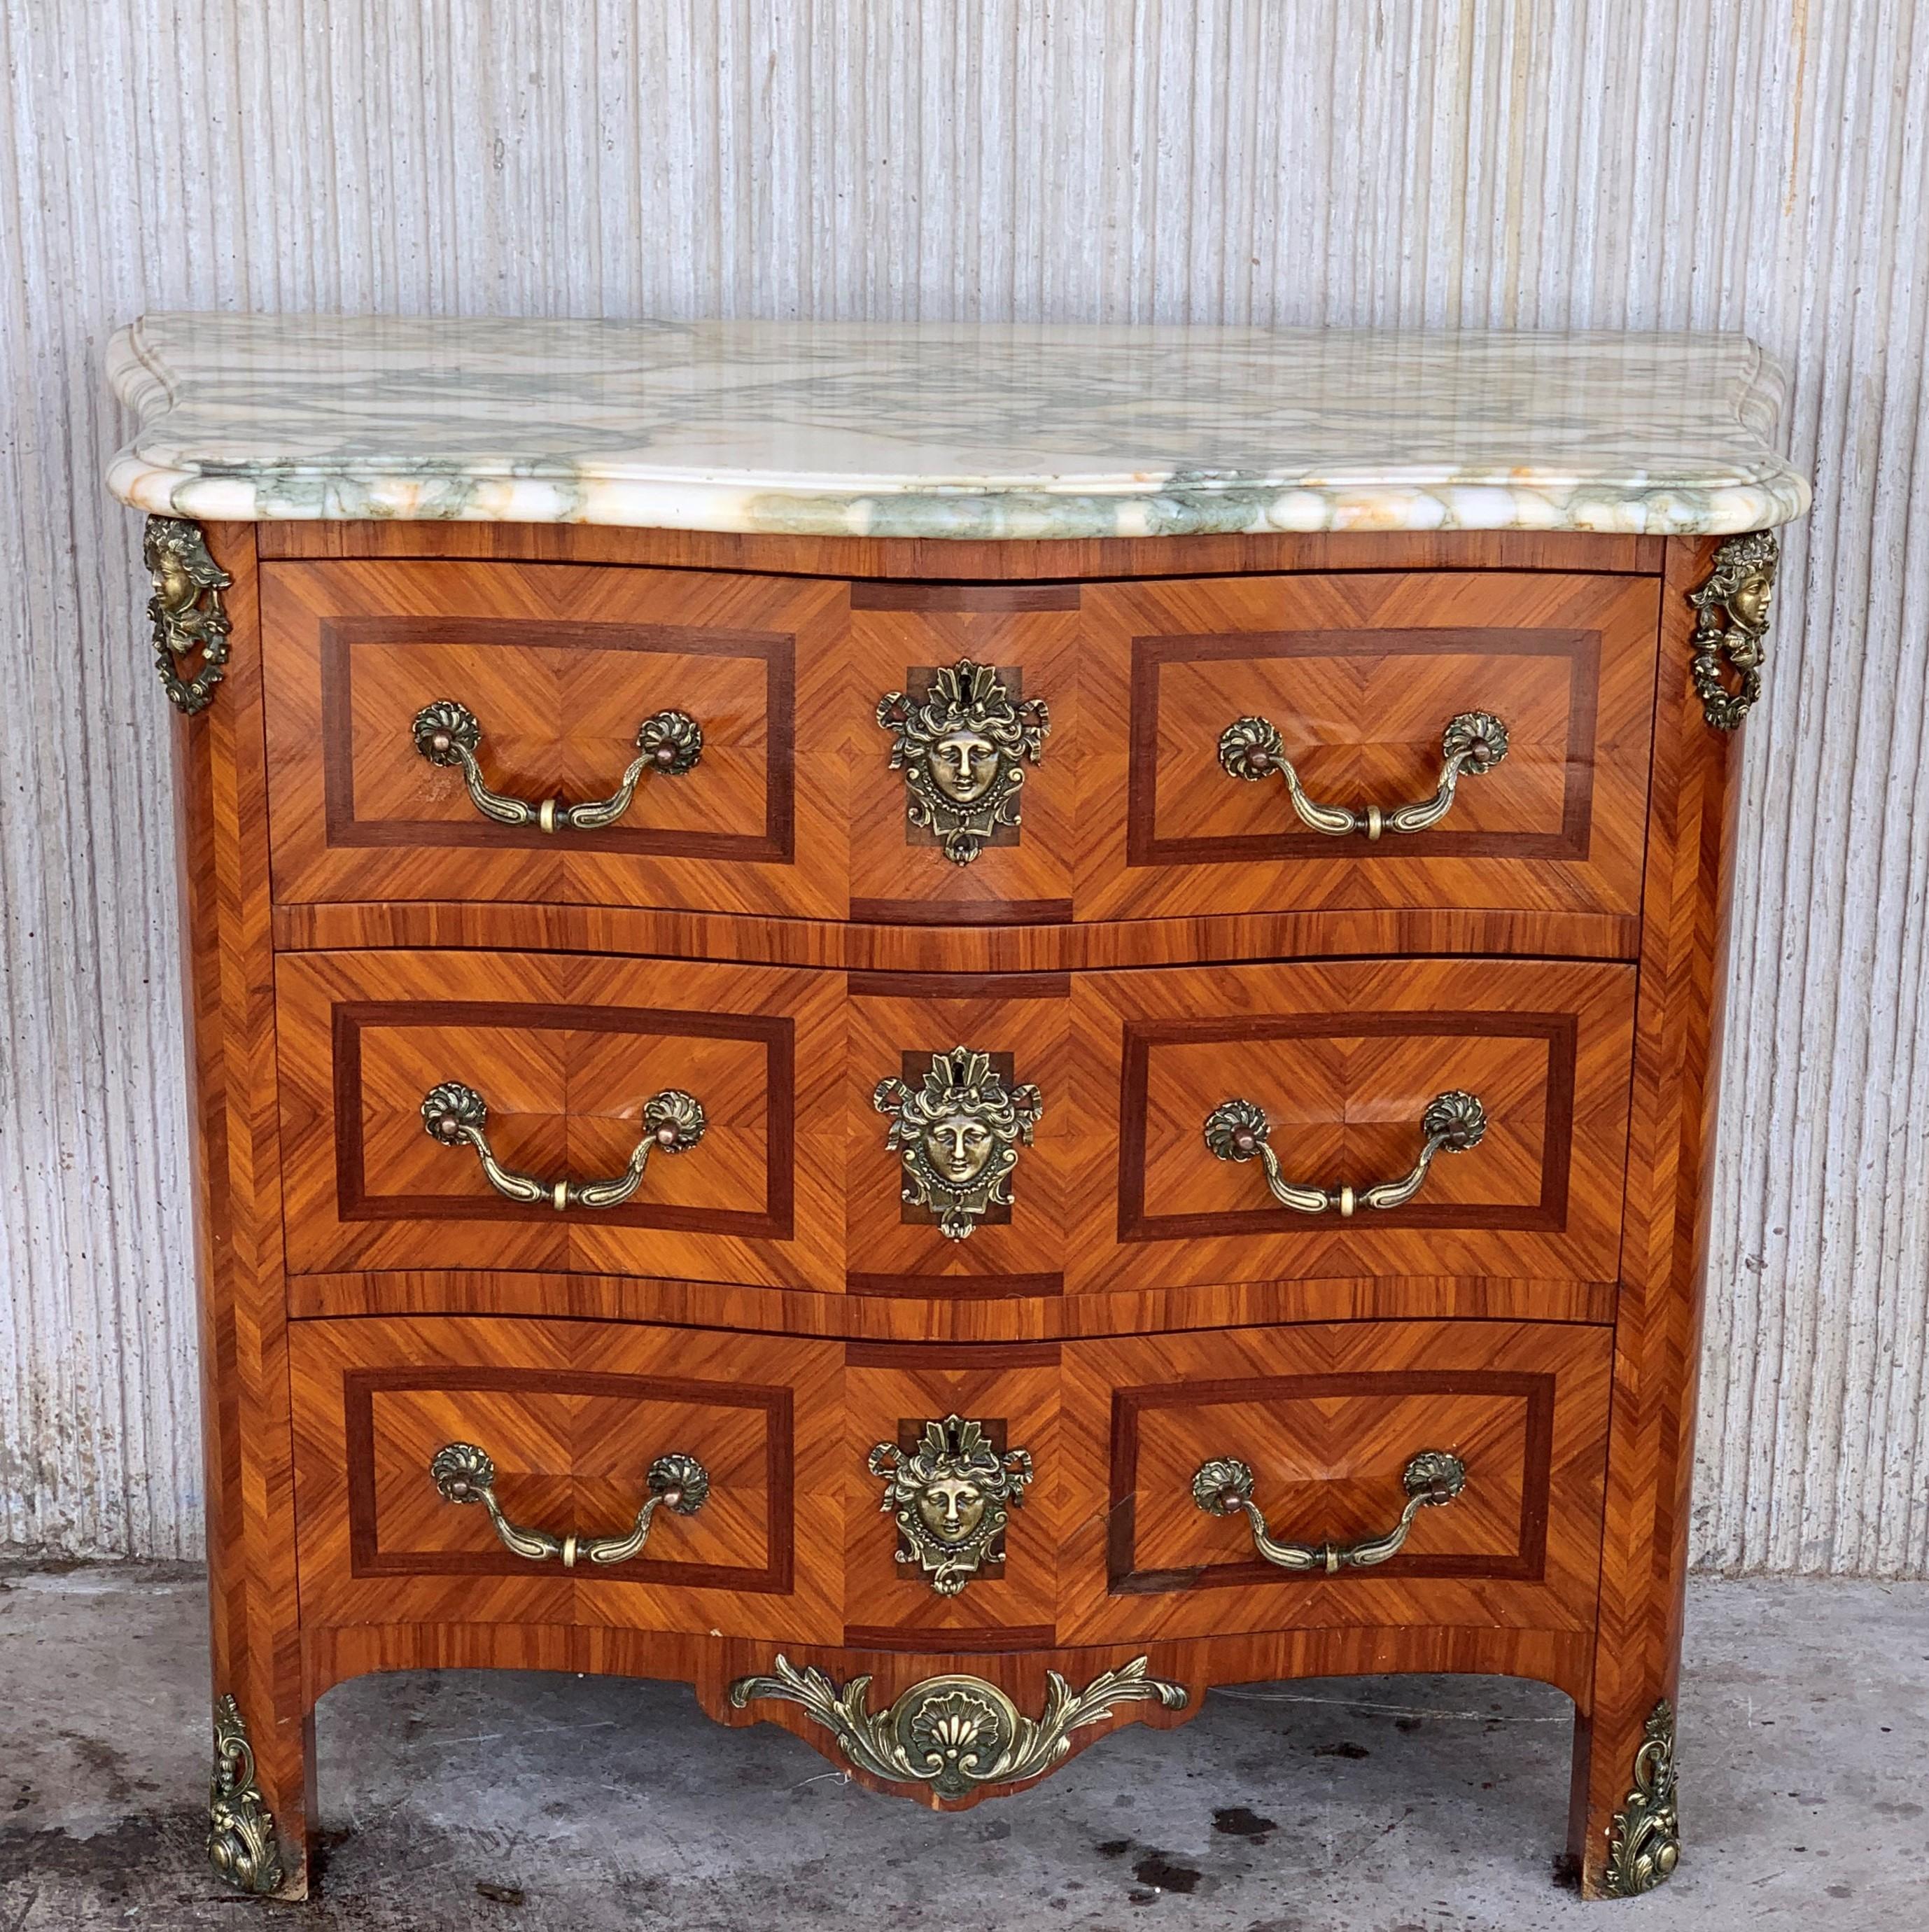 An exquisite early 20th century Italian period Baroque three-drawer chest with serpentine front and drawers and beautiful bronze mounts. The top is made of beleveled marble.